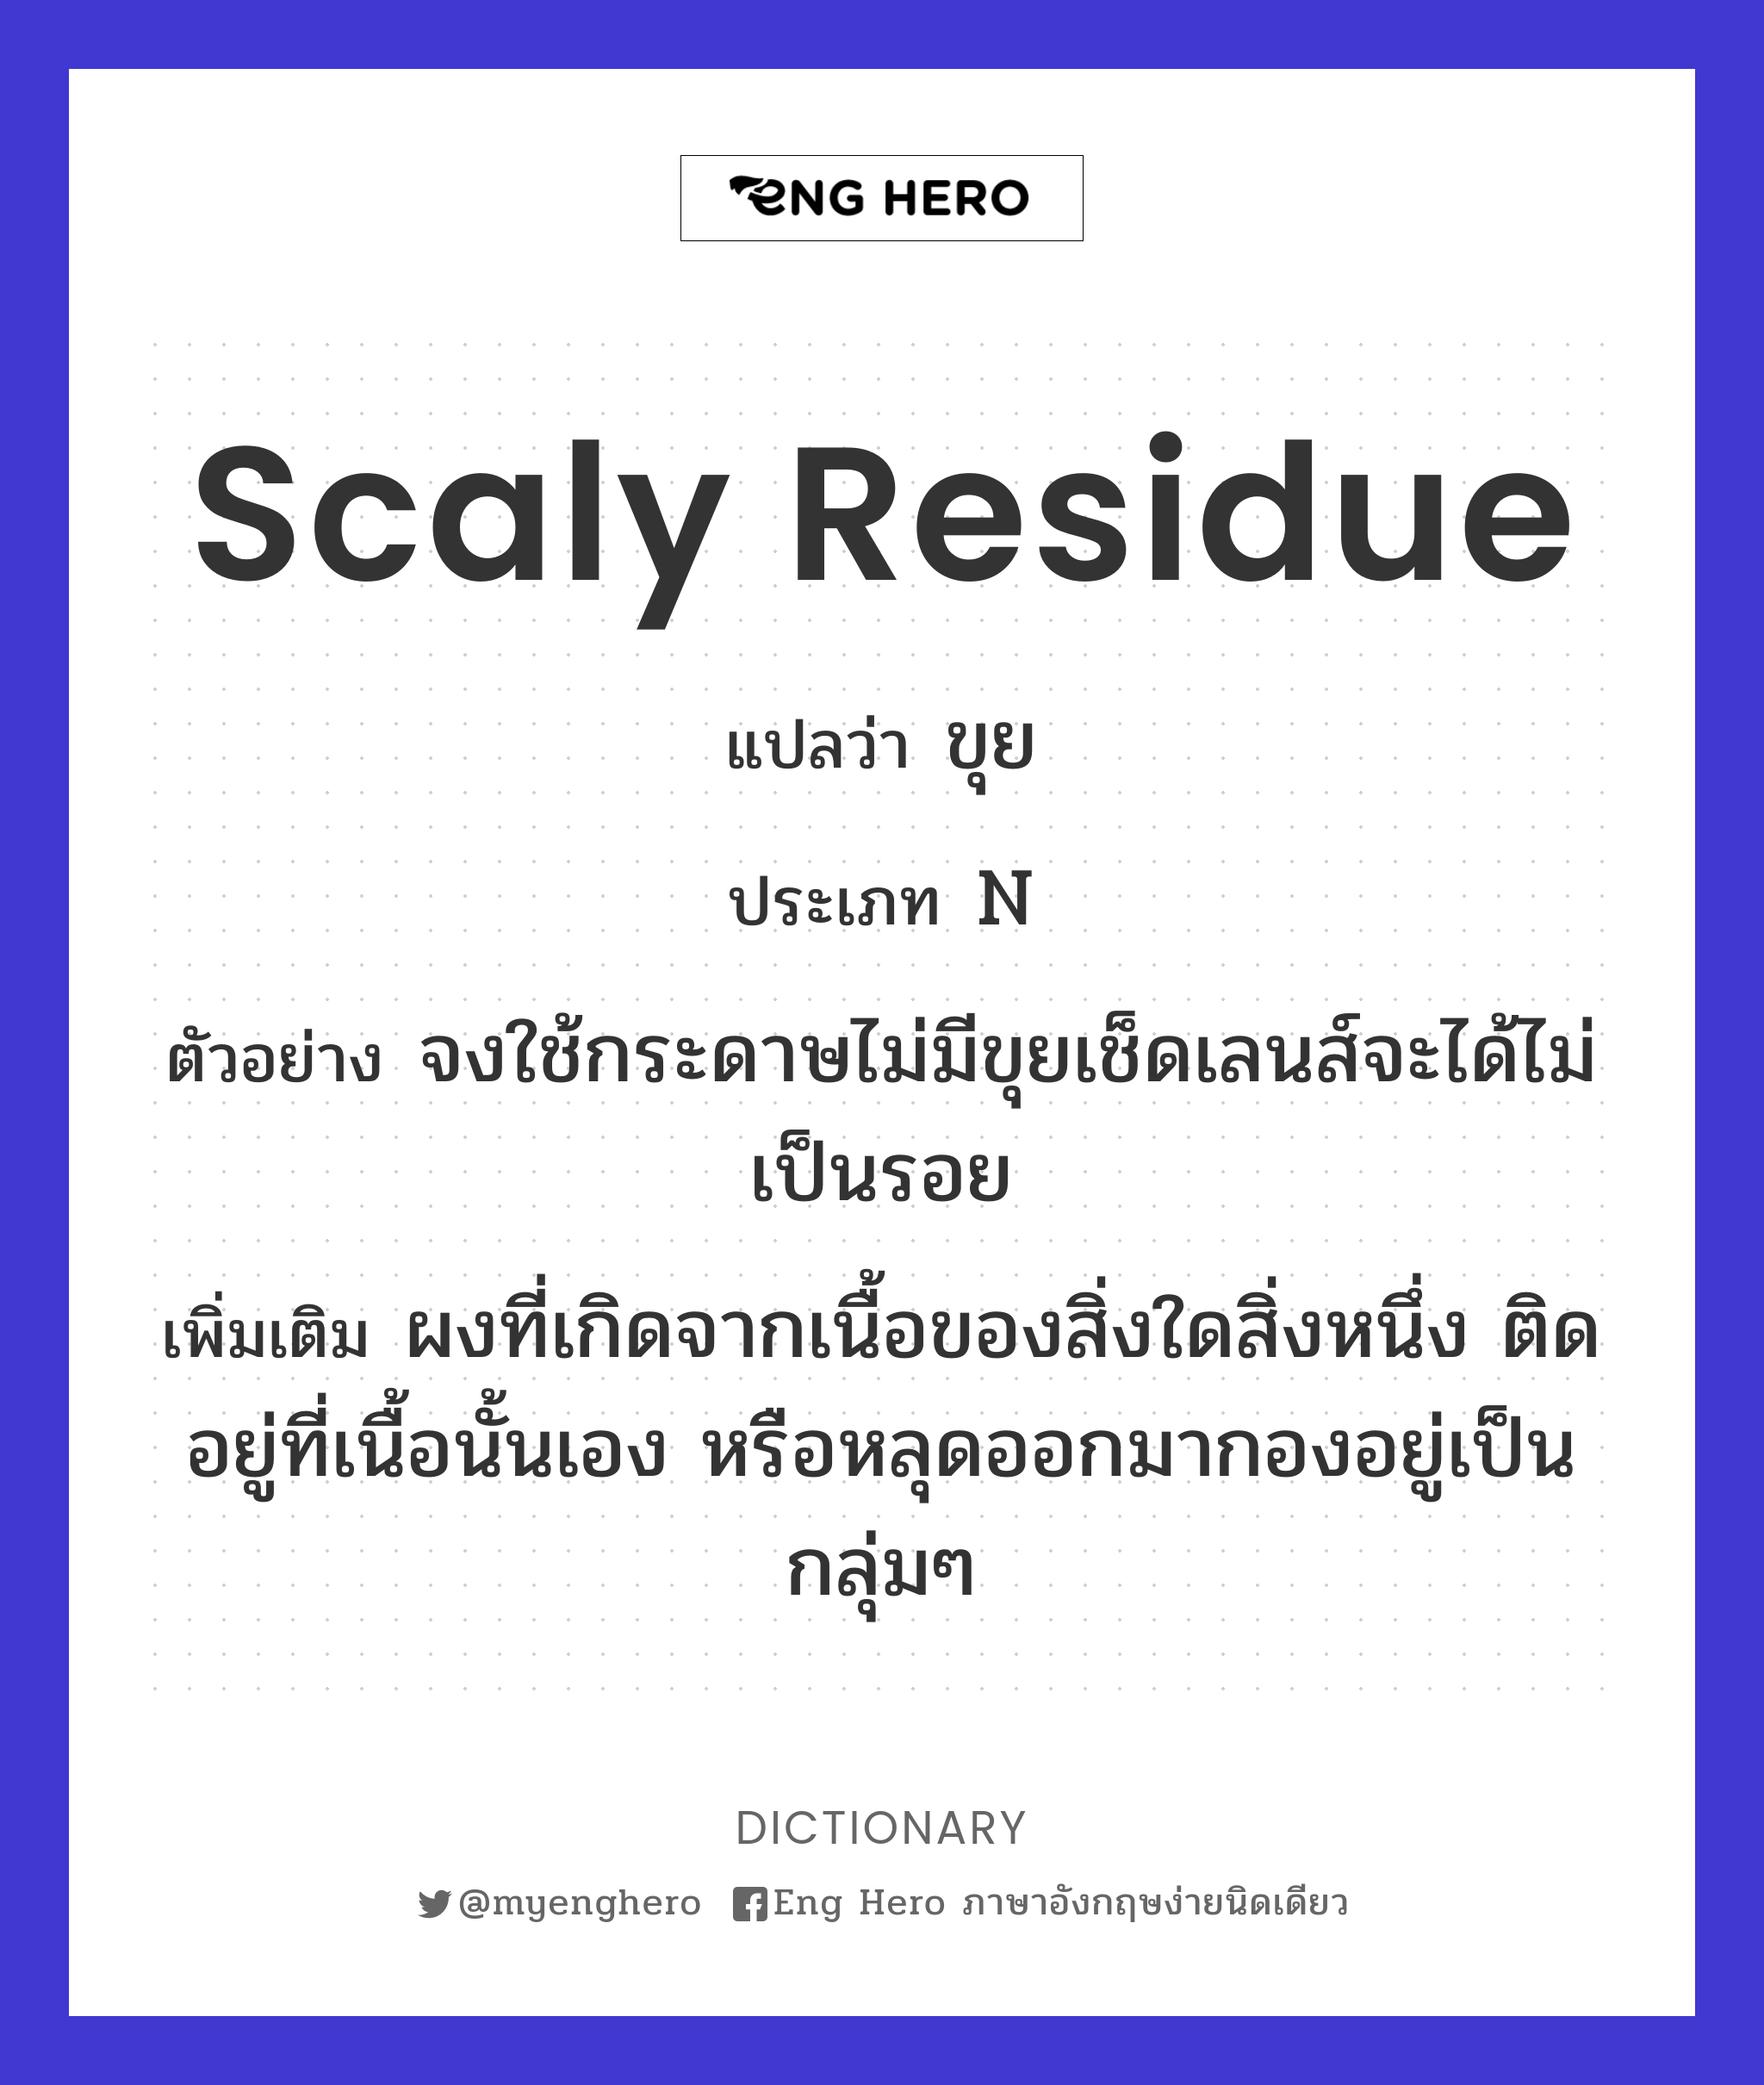 scaly residue